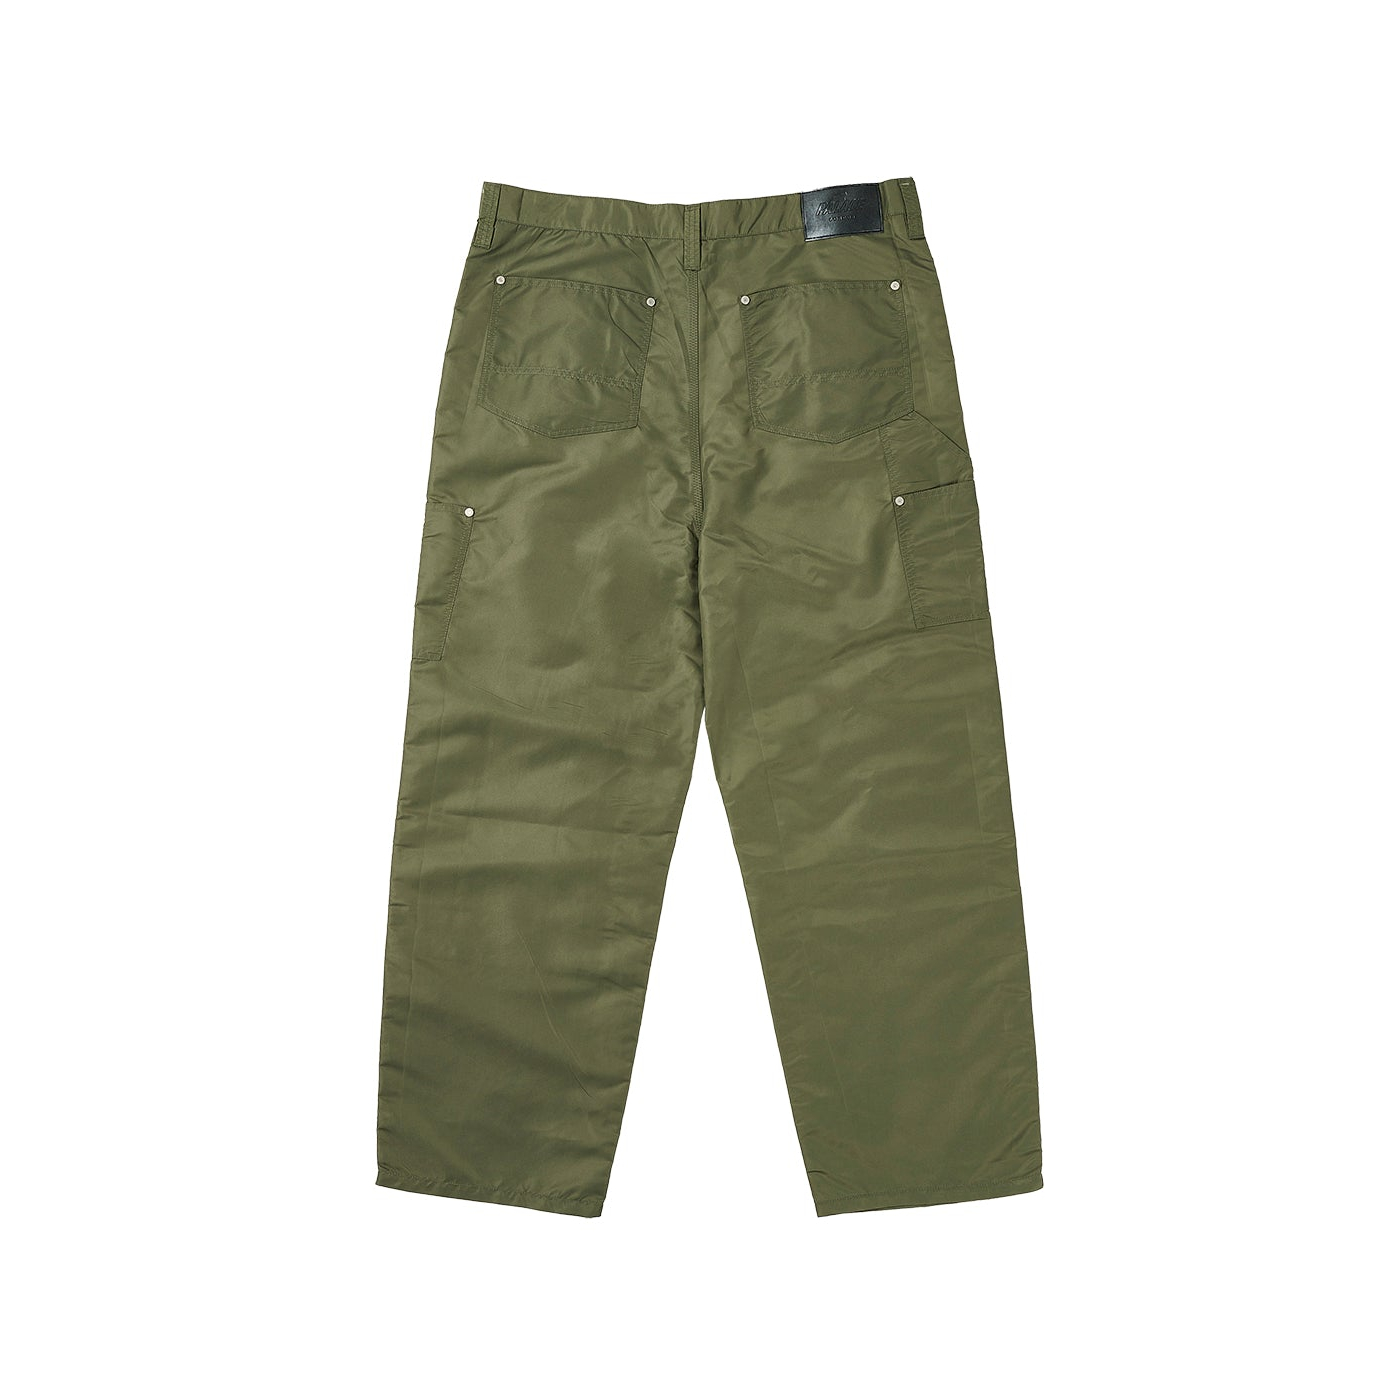 Thumbnail RODEO NYLON TROUSER THE DEEP GREEN one color